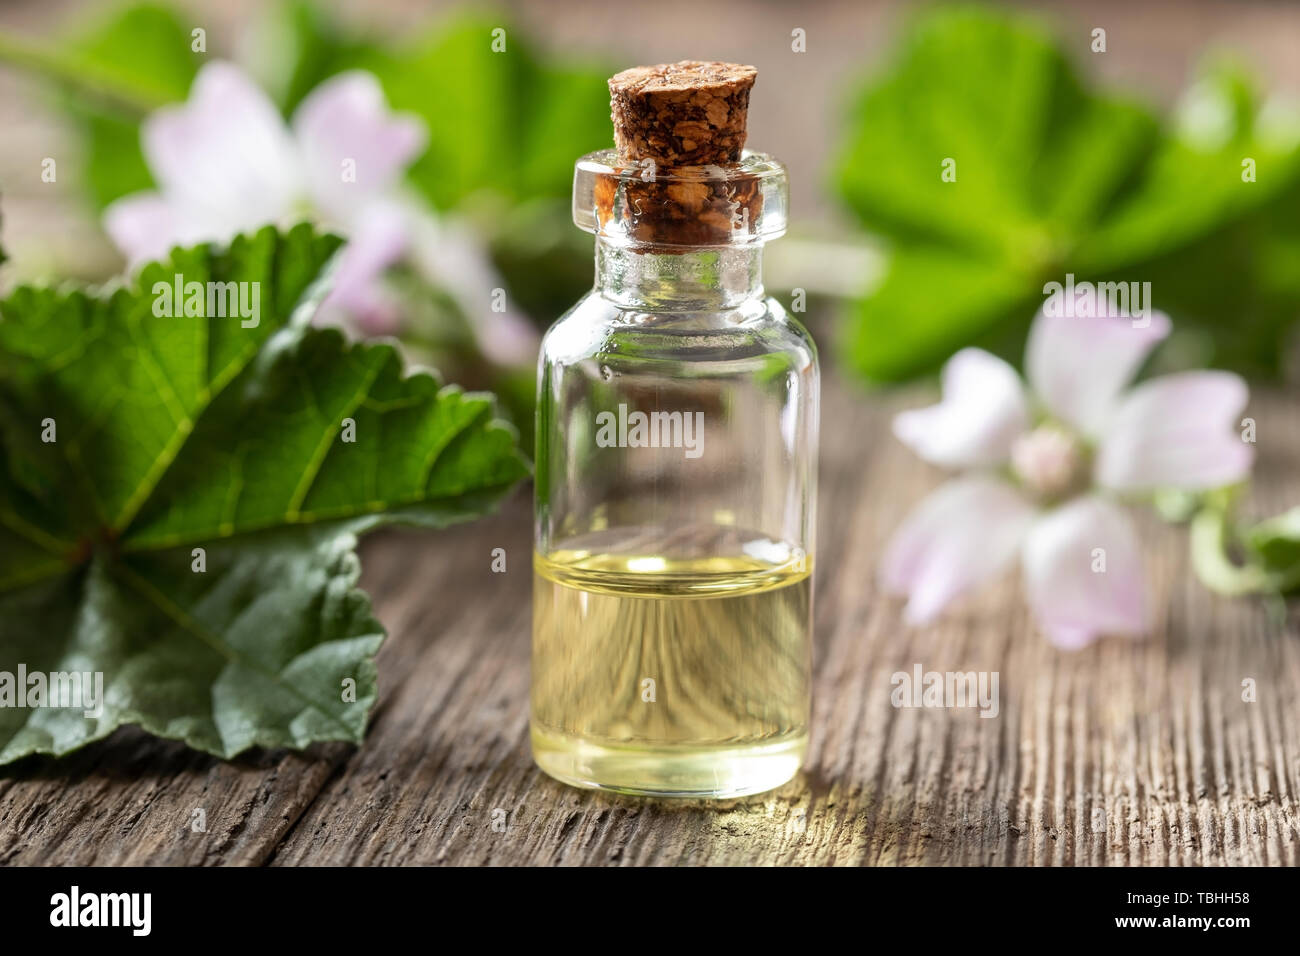 A bottle of common mallow essential oil with fresh blooming malva neglecta plant in the background Stock Photo